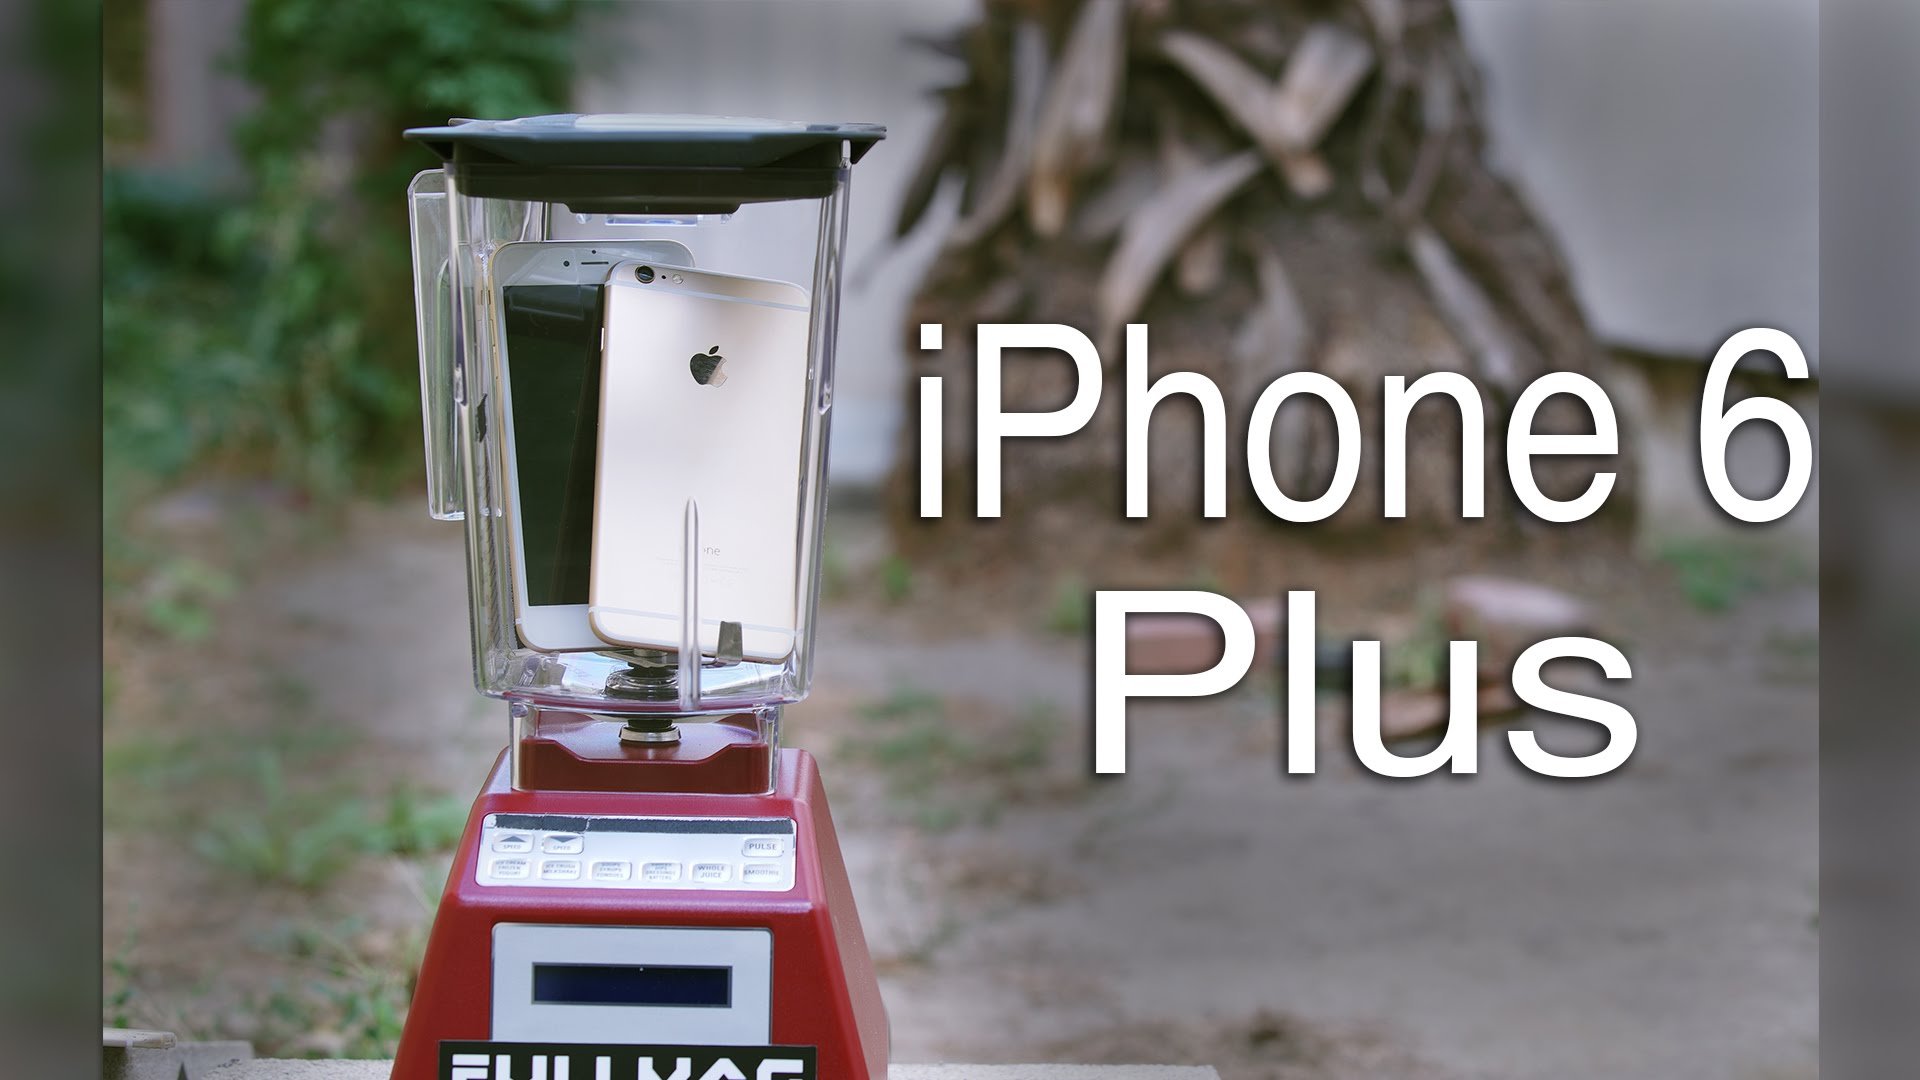 iPhone 6 Plus: Will it Blend? (Video) 1